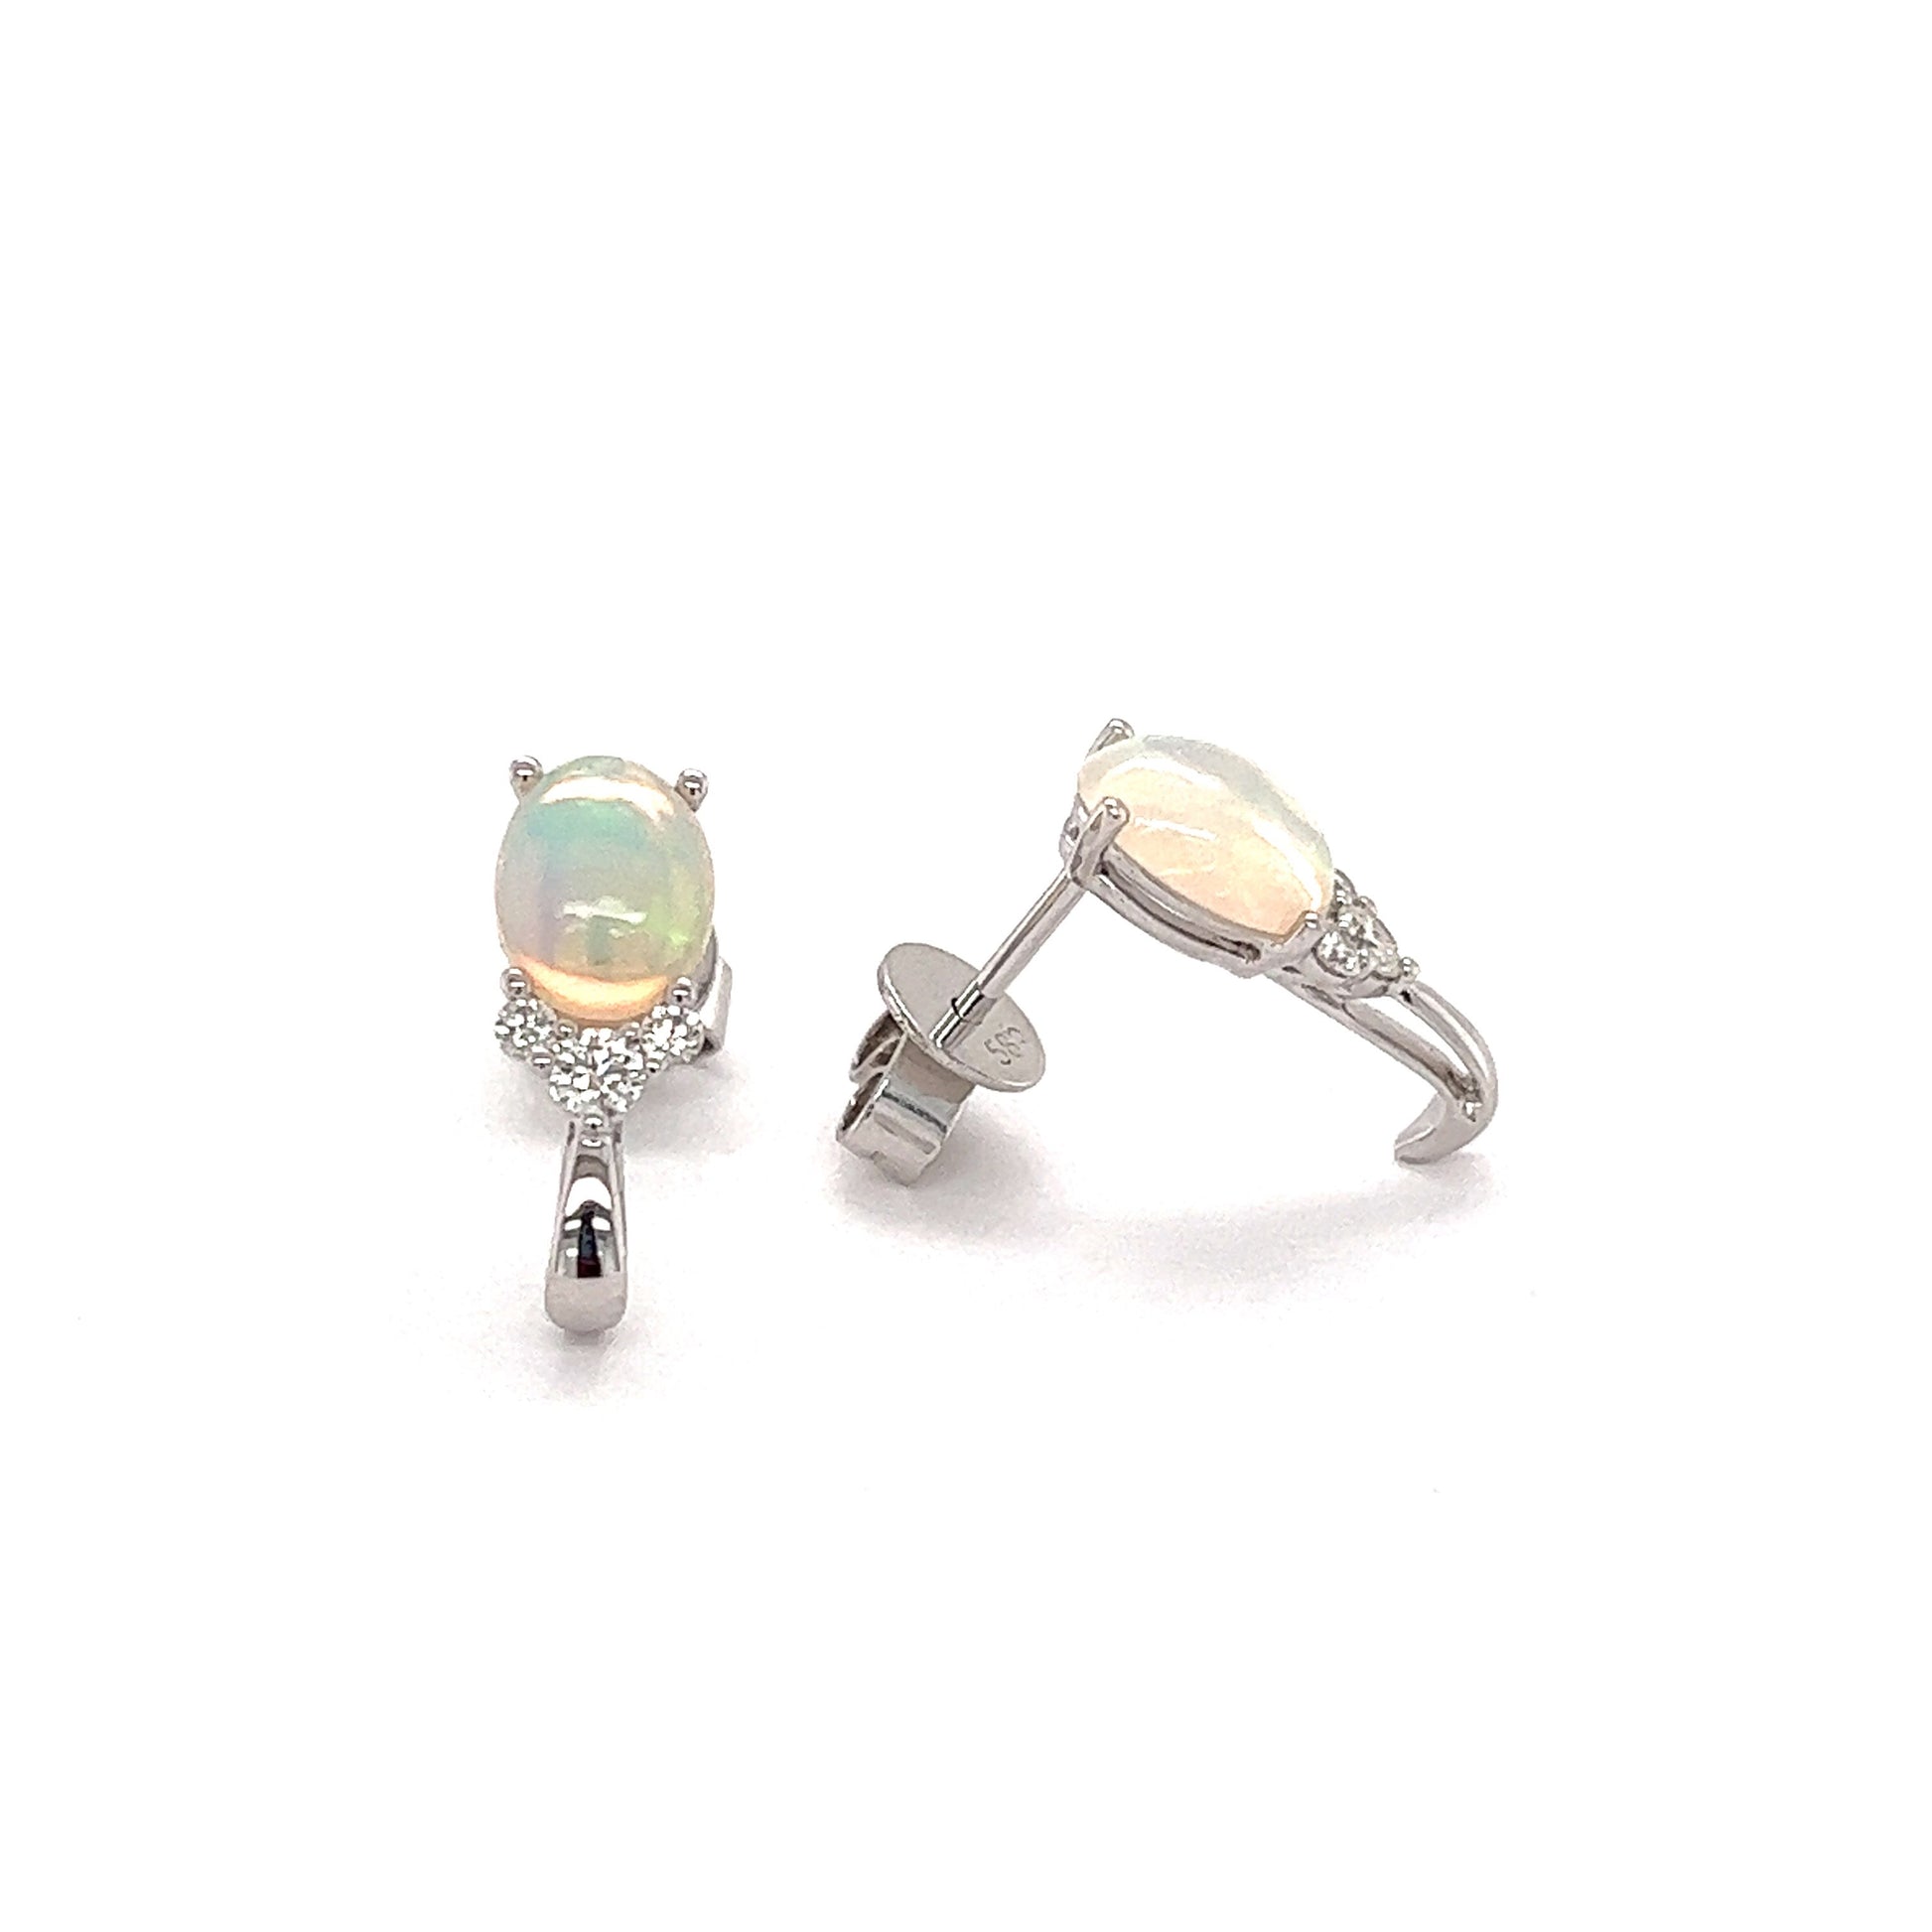 White Ethiopian Opal Stud Earrings with Side Diamonds in 14K White Gold Front and Accent View